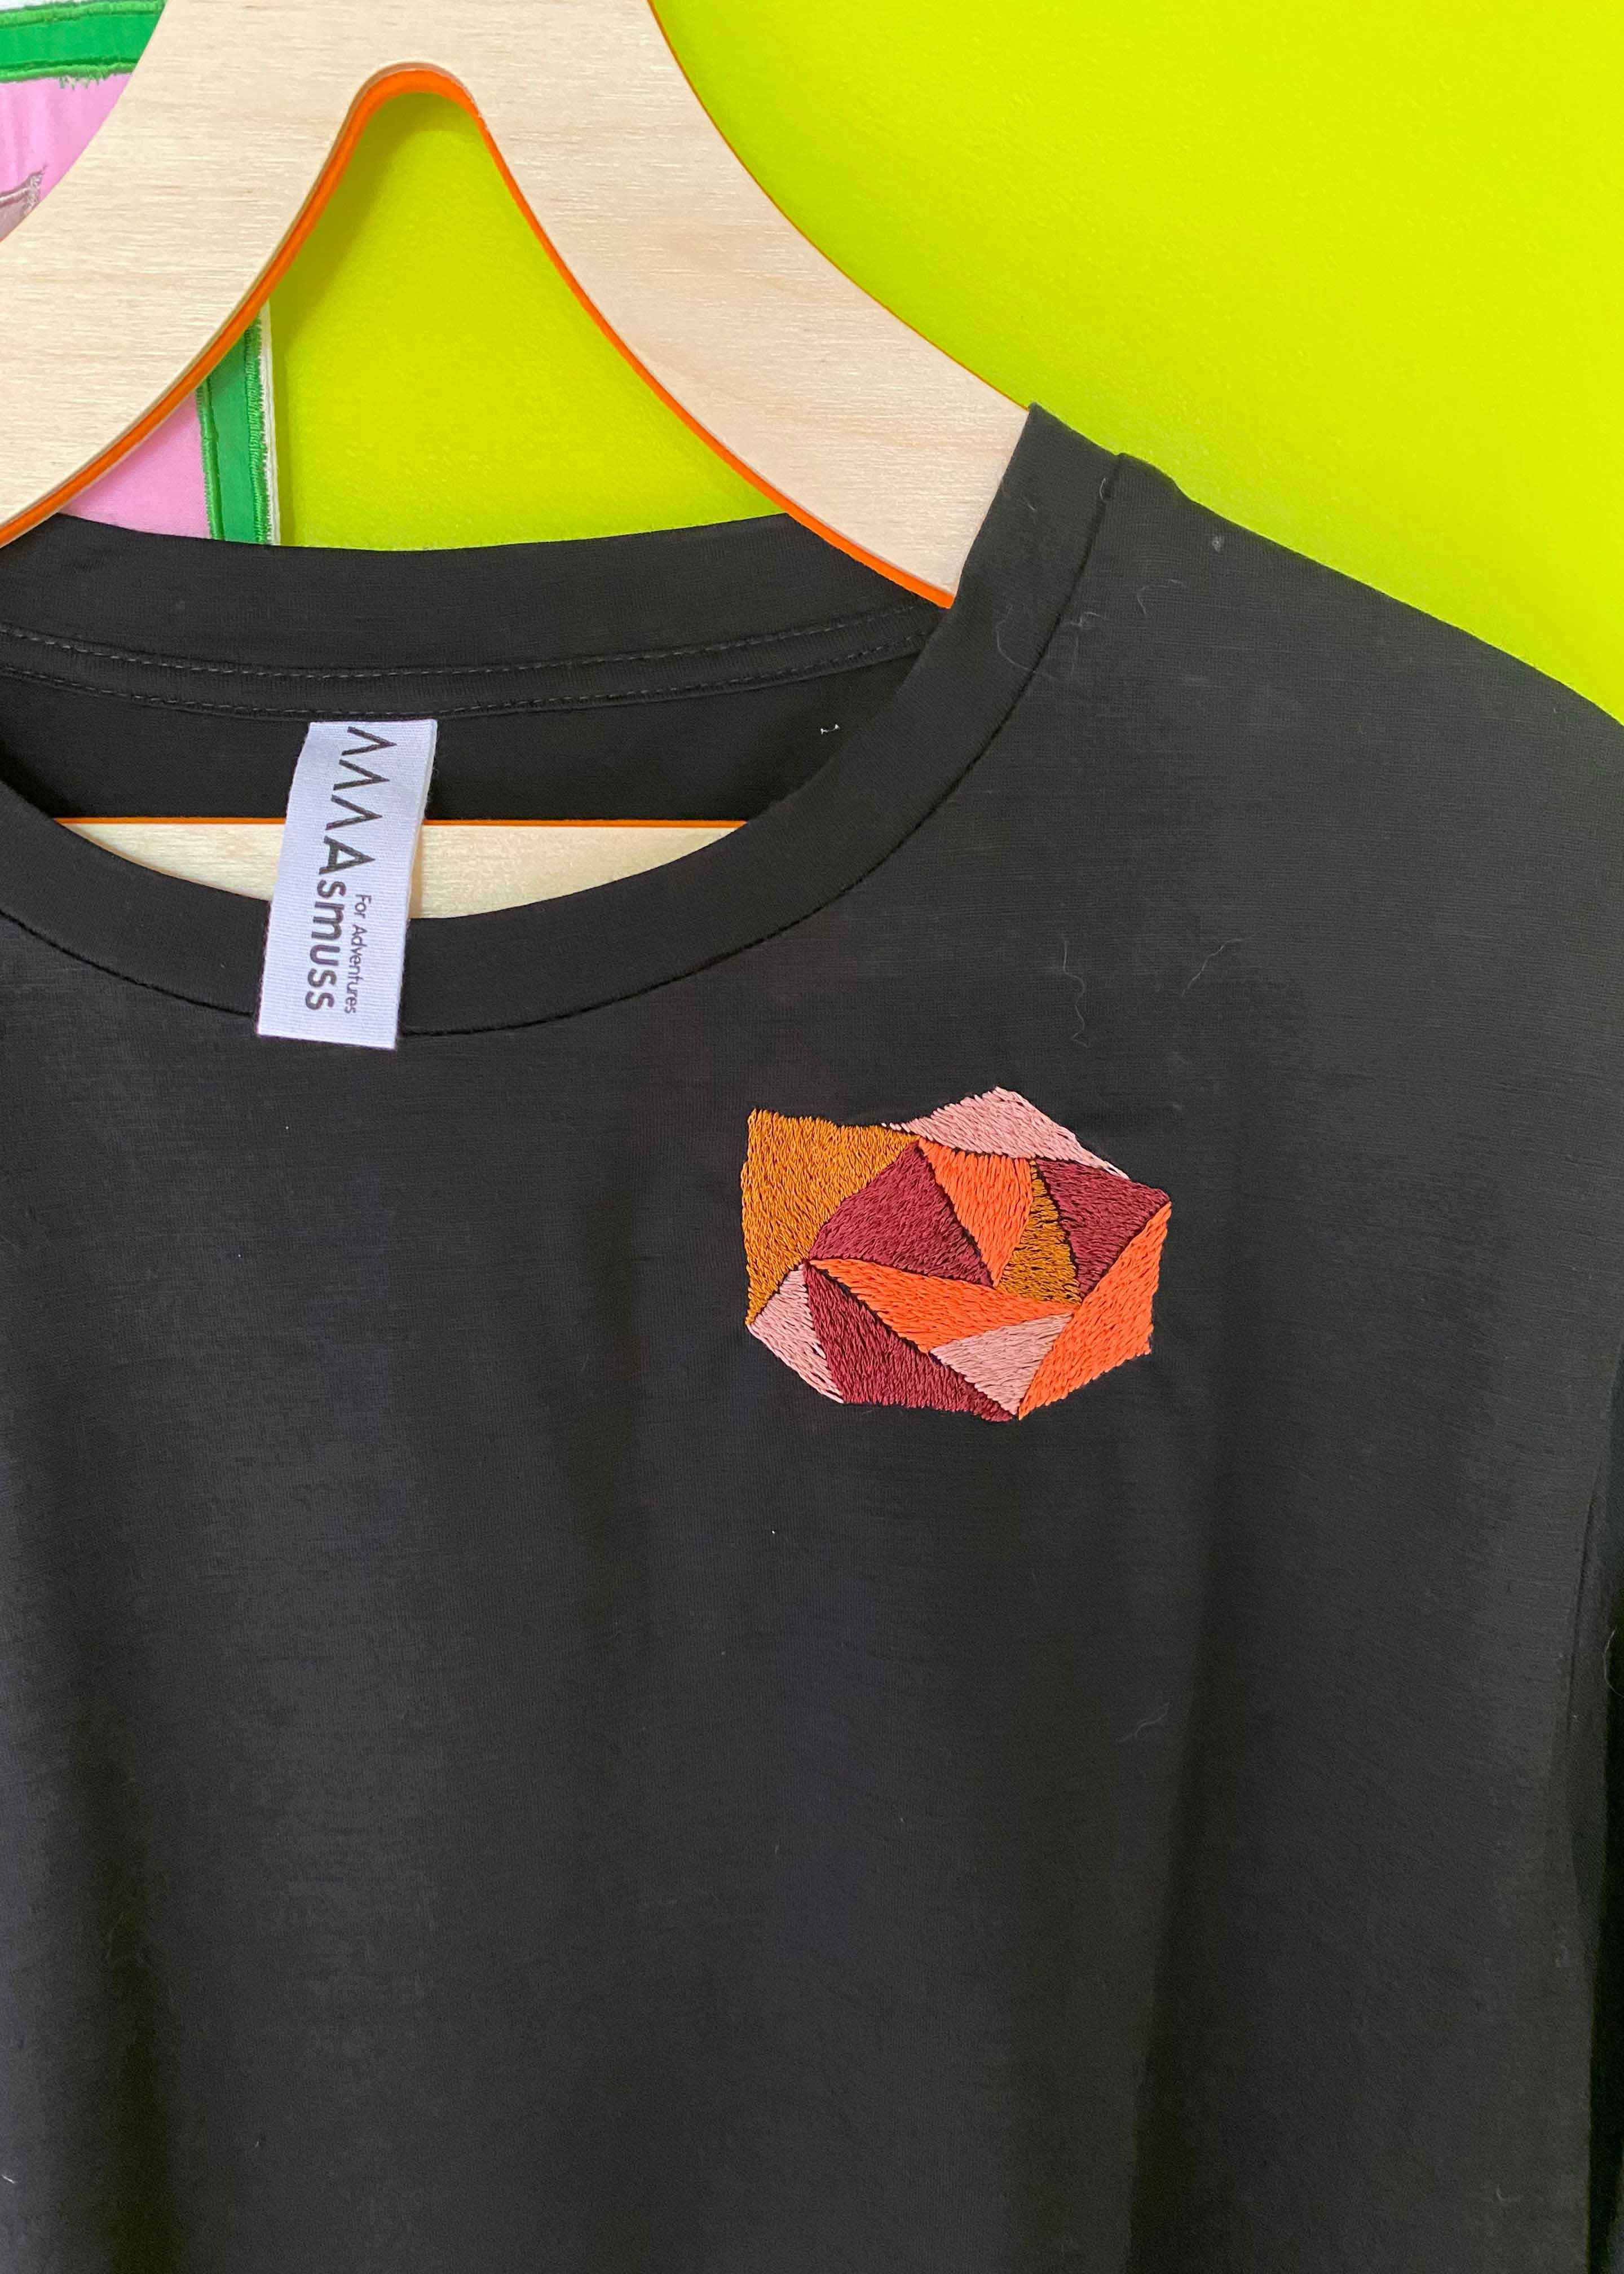 close up of hand embroidery on black tee shirt. Hand embroidery is an abstract geometric rose in oranges, mustard, deep red and pale pink